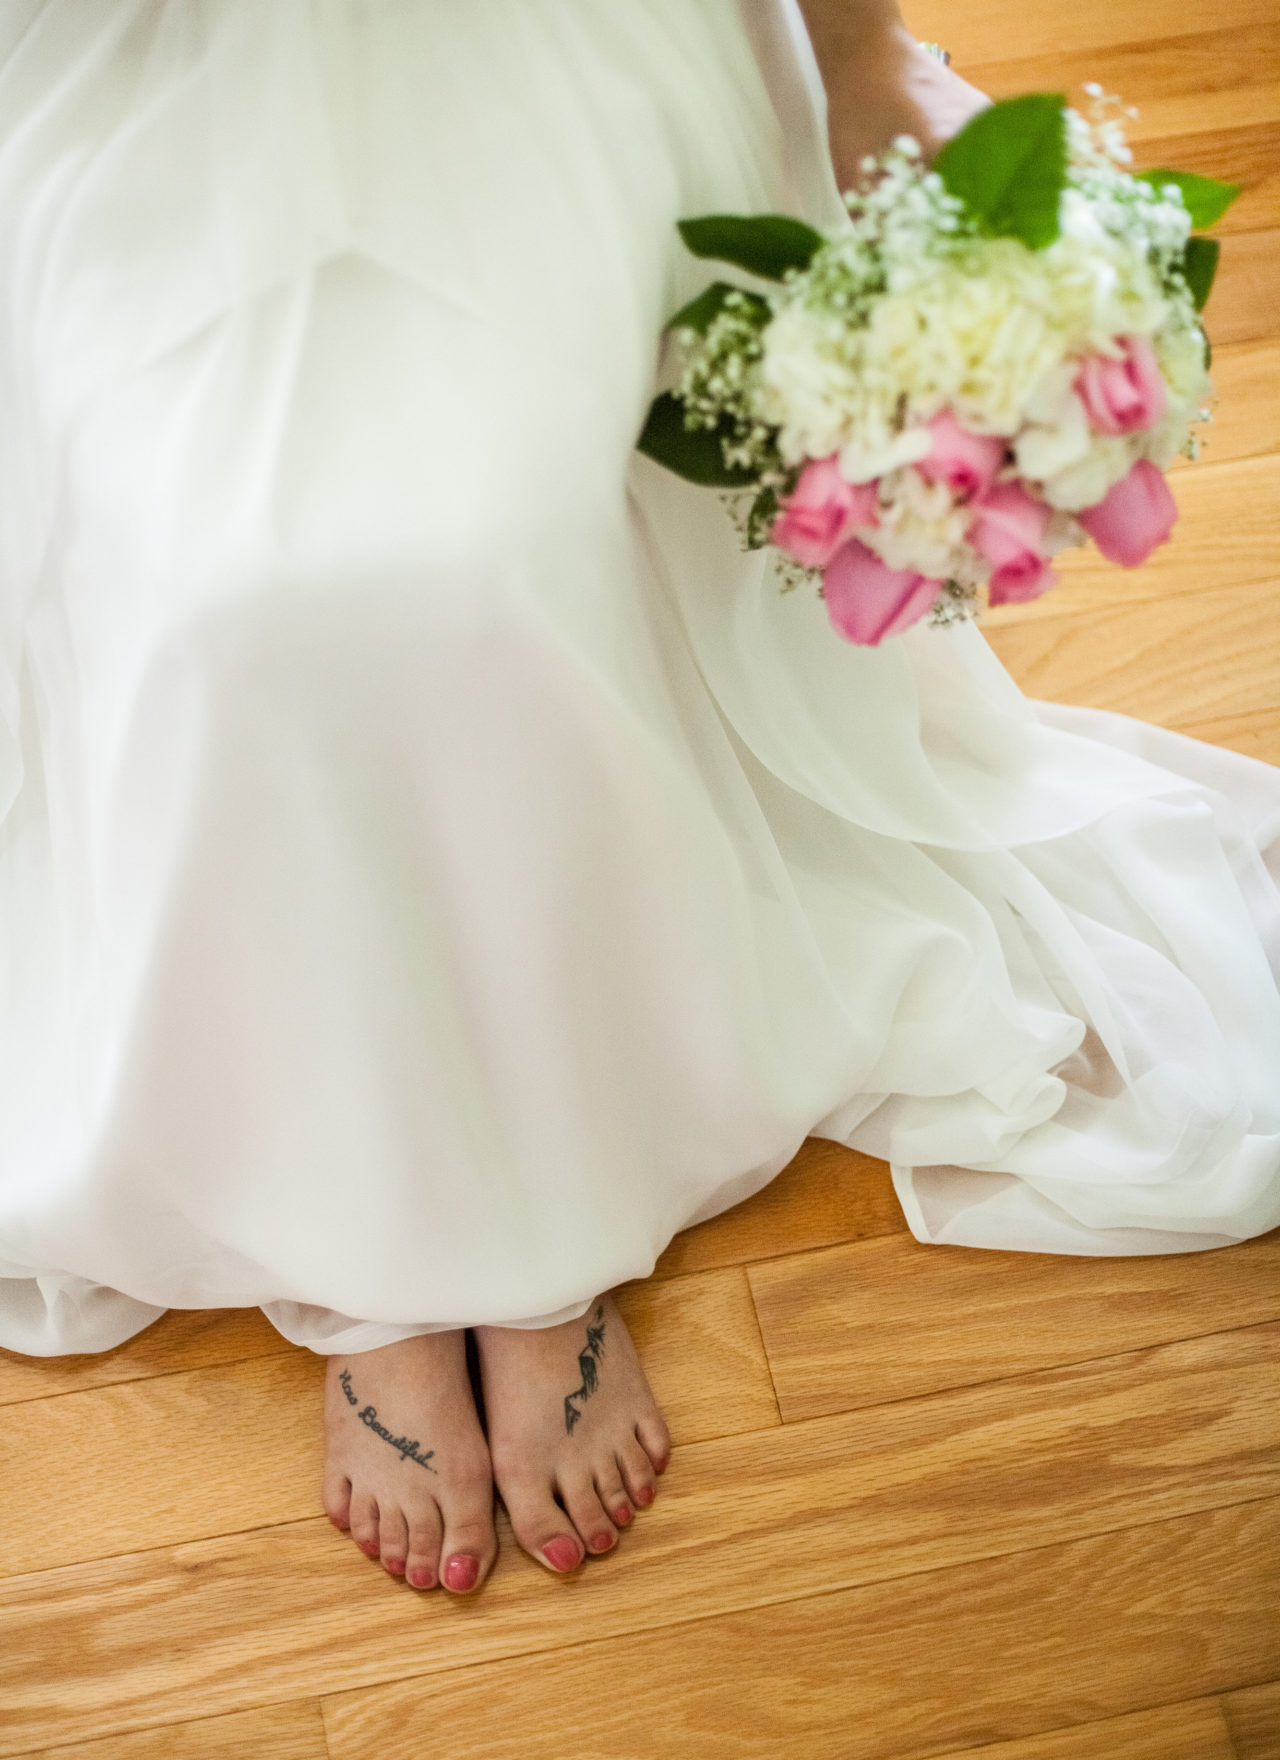 10 Self-Care Tips For Brides